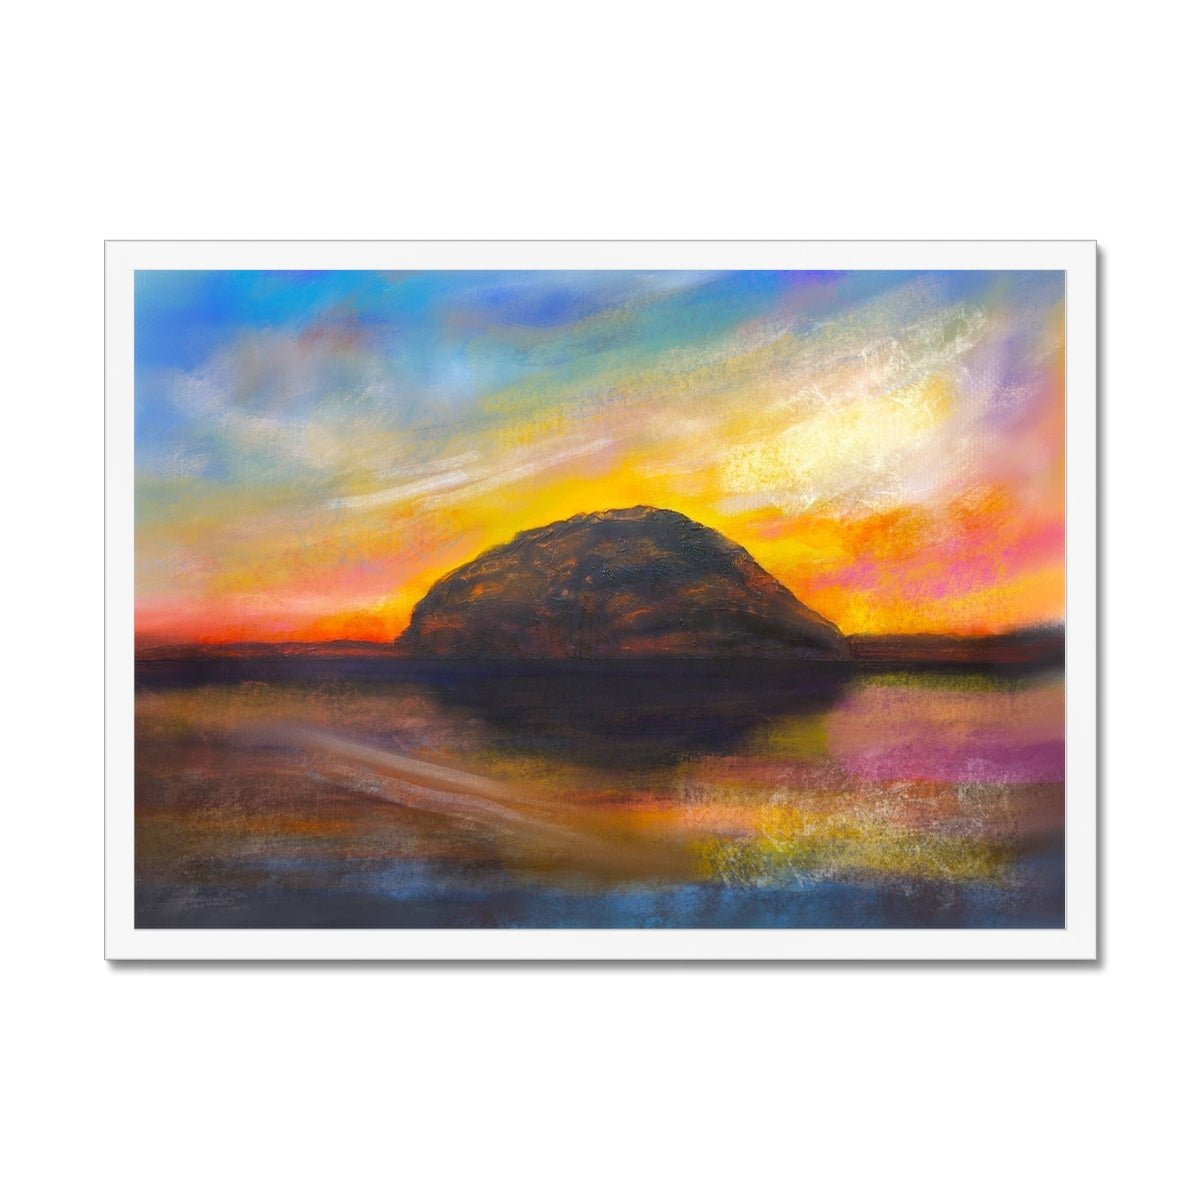 Ailsa Craig Dusk Painting | Framed Prints From Scotland-Framed Prints-Arran Art Gallery-A2 Landscape-White Frame-Paintings, Prints, Homeware, Art Gifts From Scotland By Scottish Artist Kevin Hunter